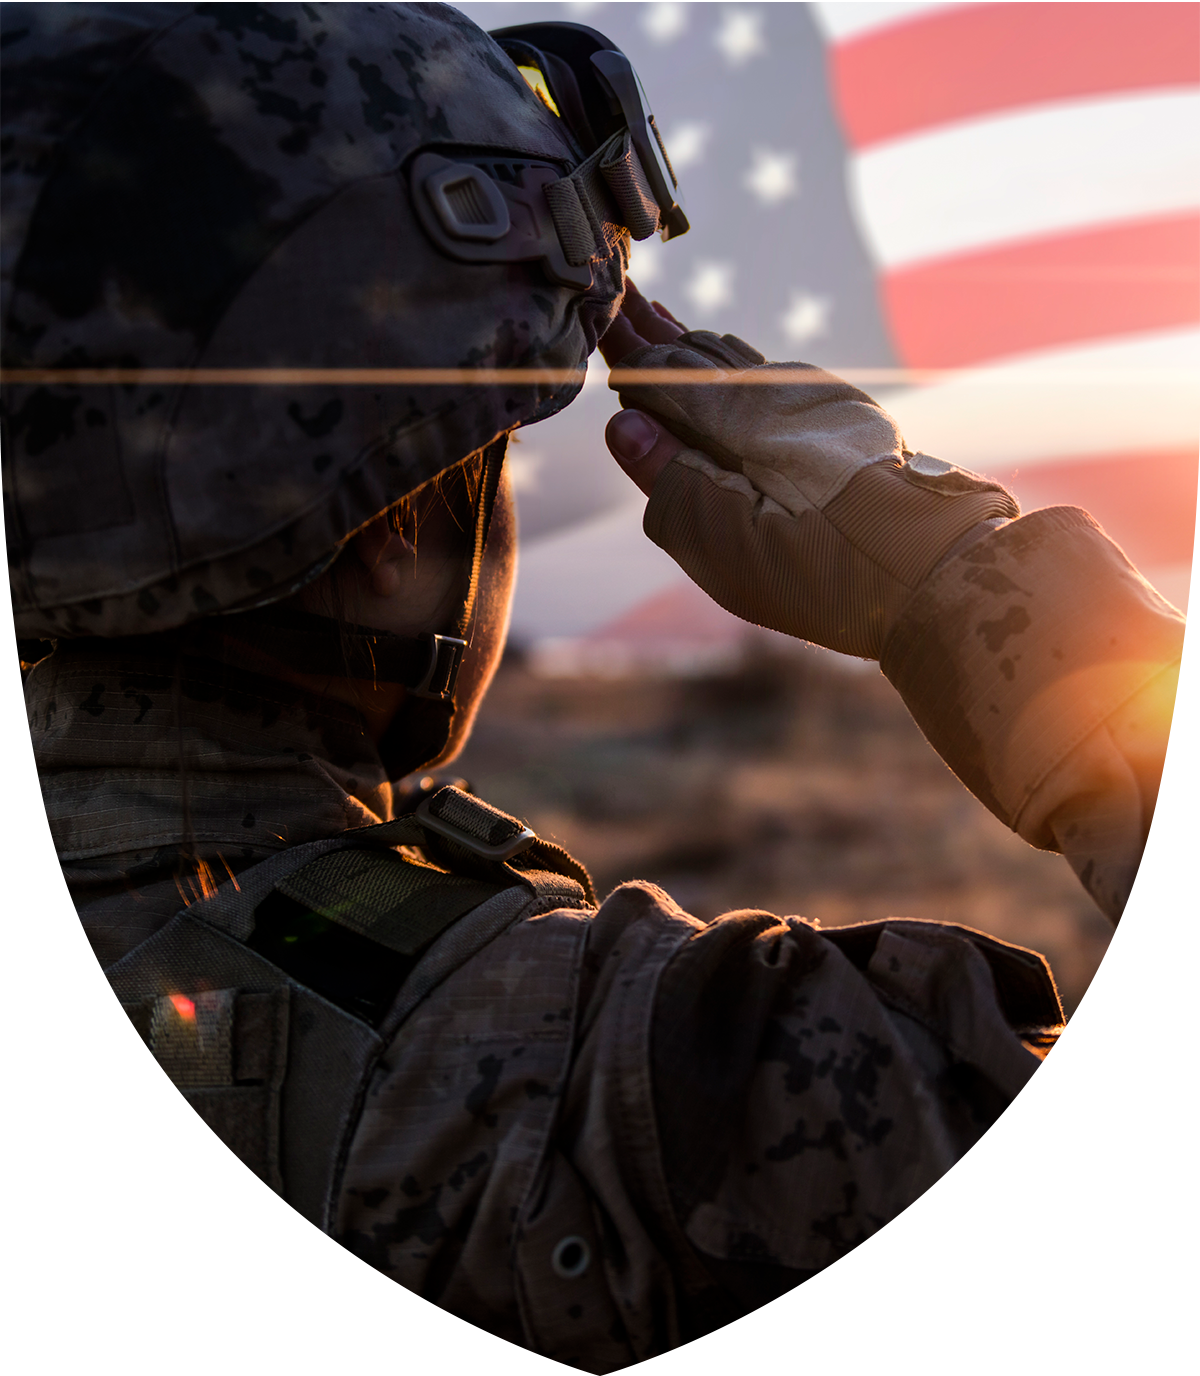 Soldier saluting with American flag in background